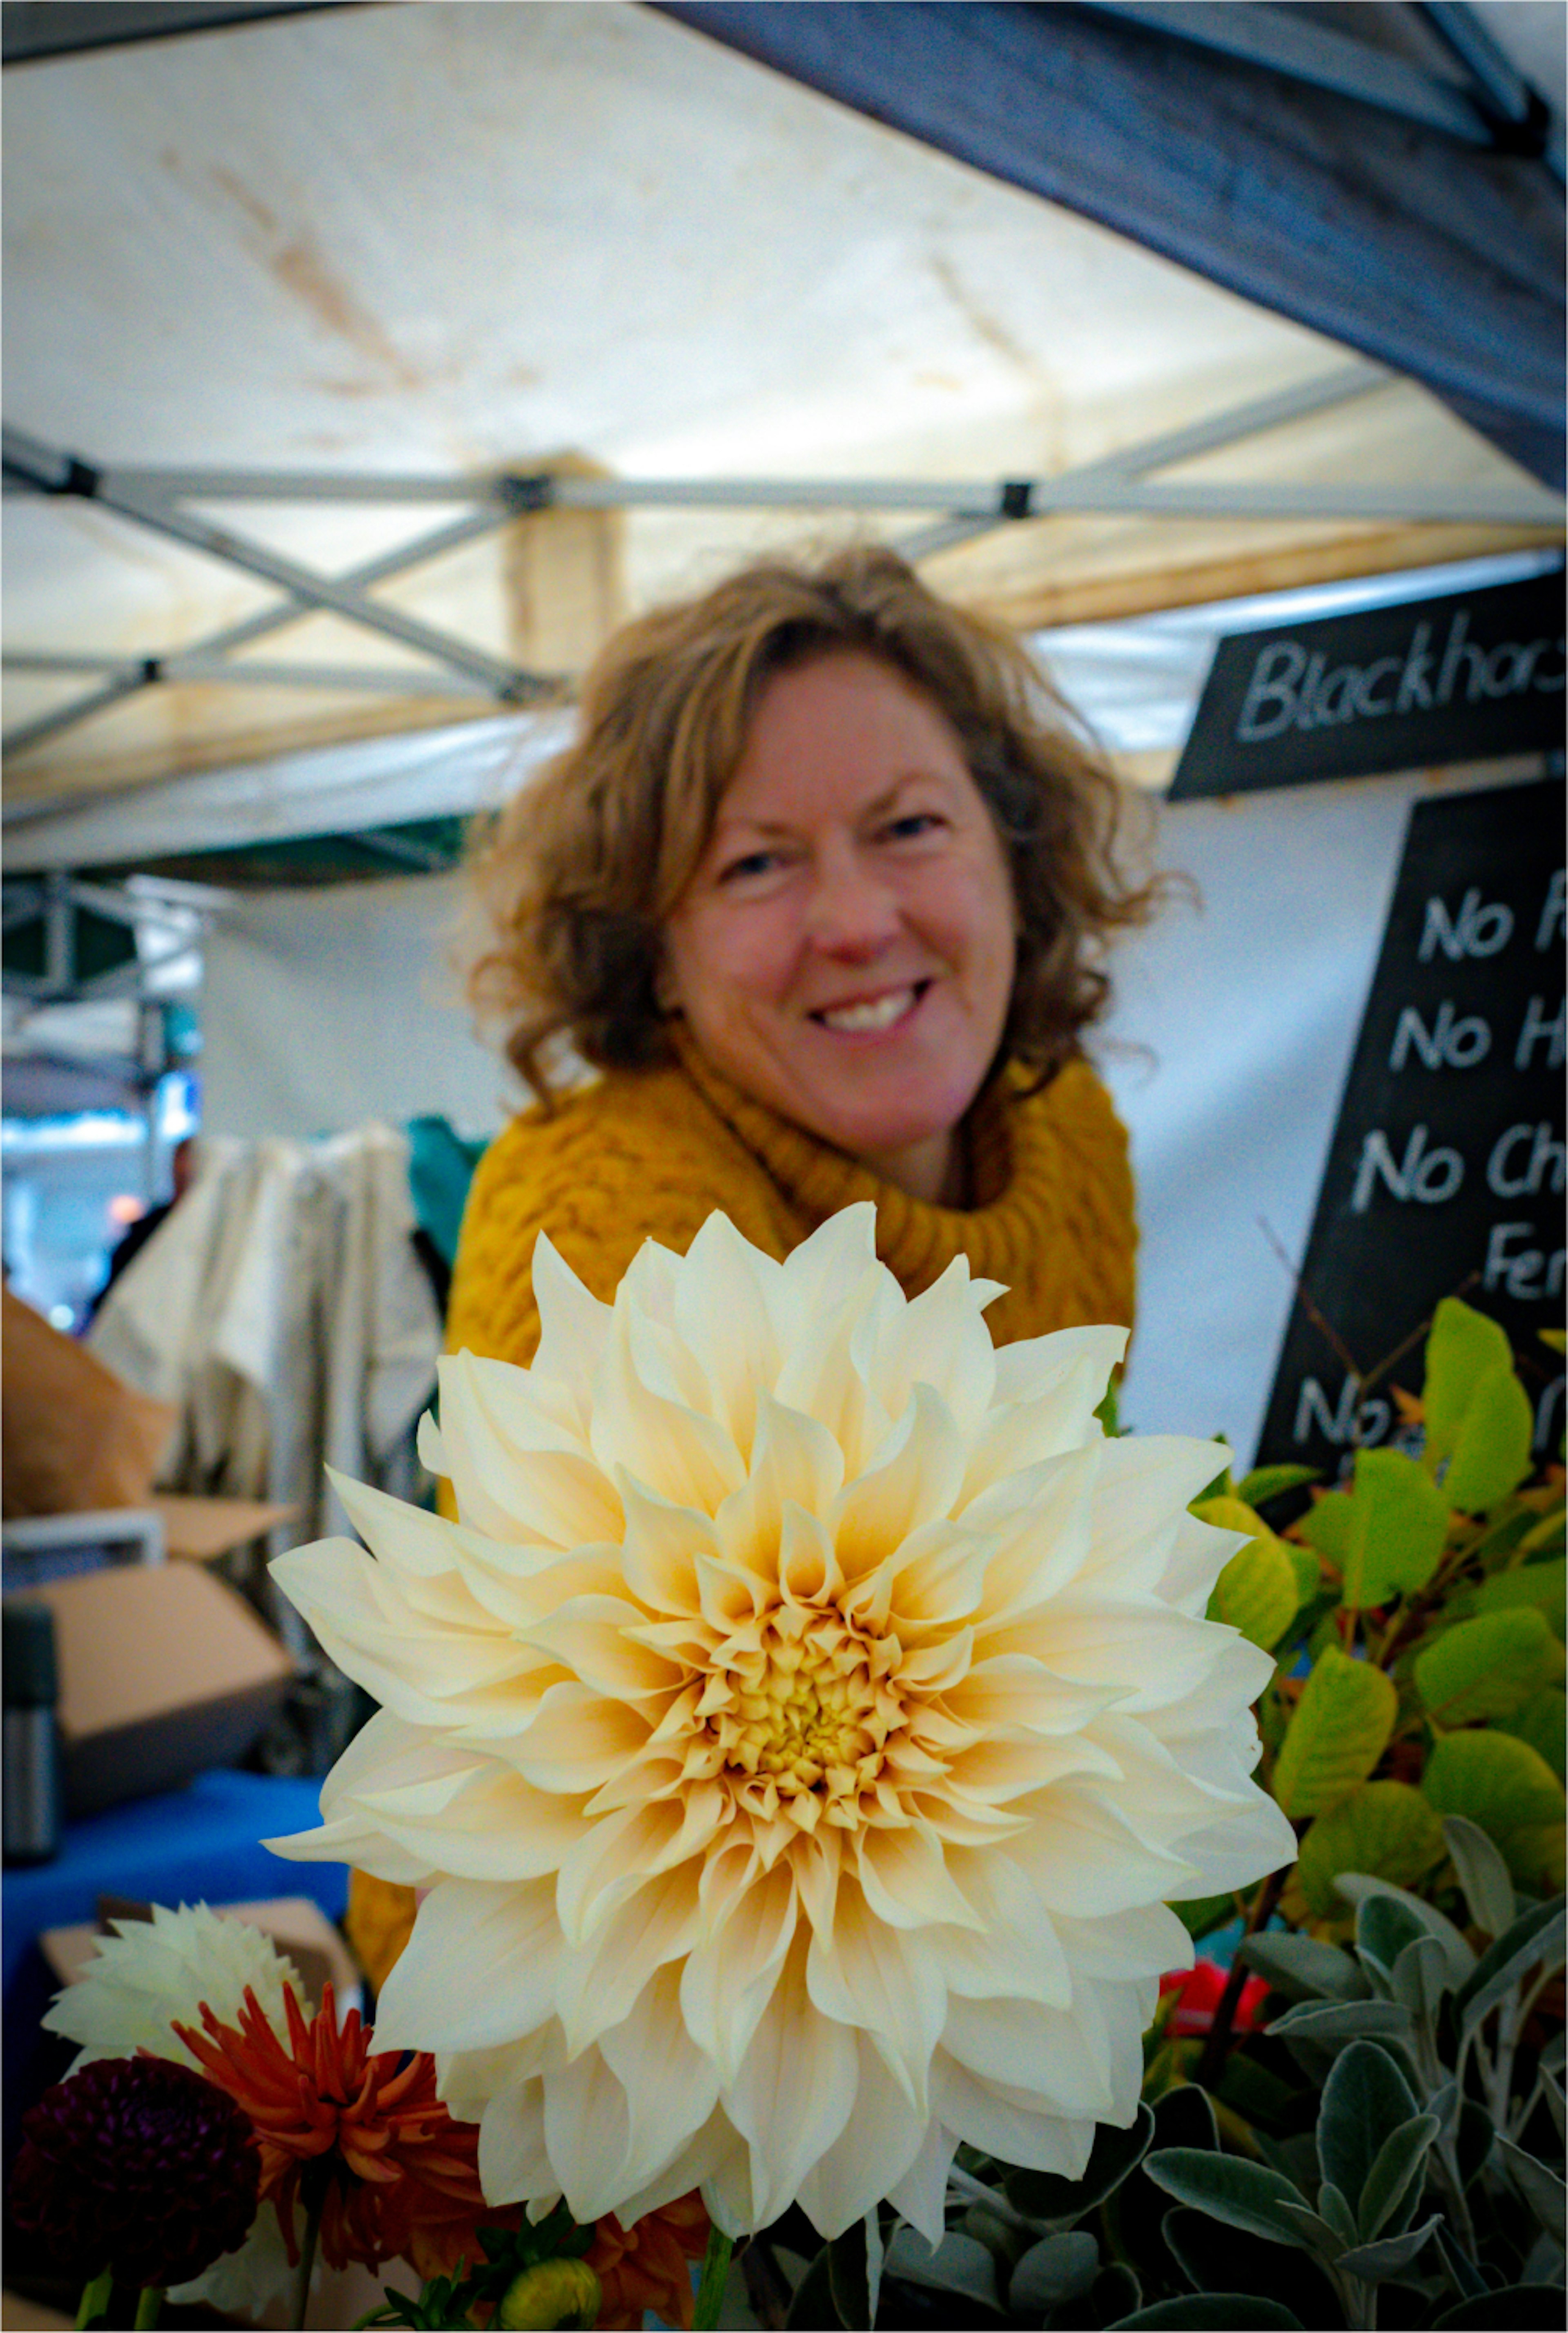 Woman Holding flower while smiling at camera.